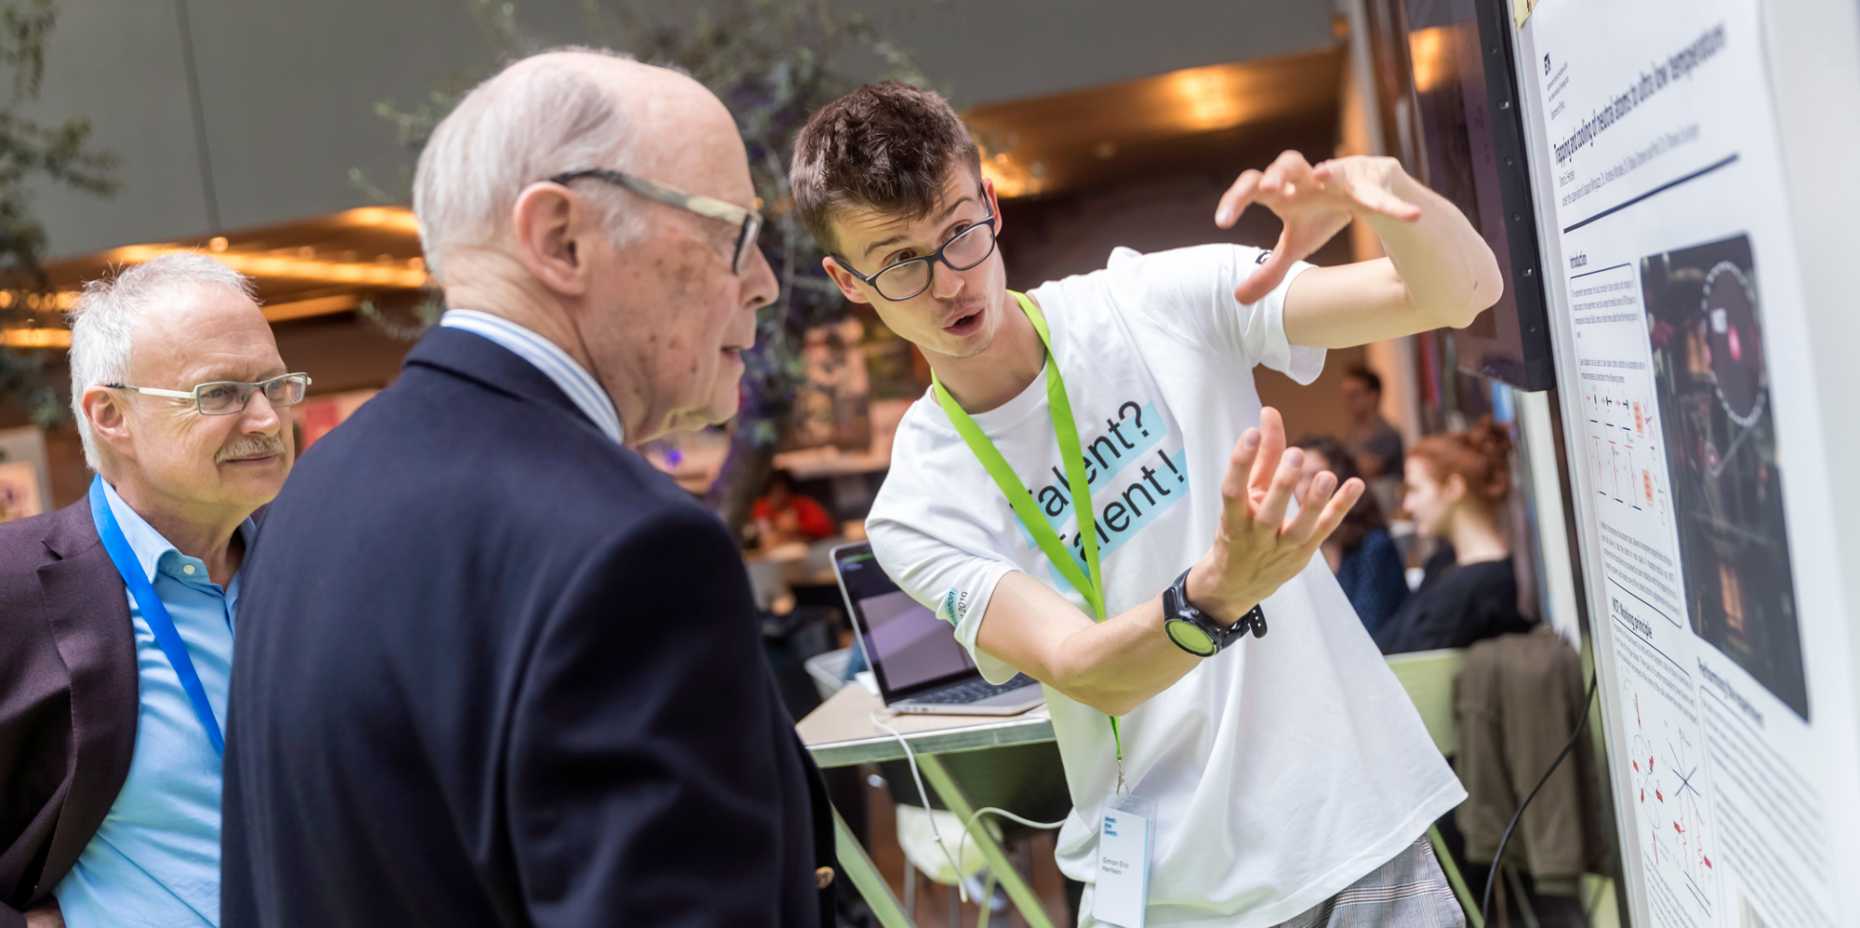 Master's student Simon Hertlein explains his work to two invited guests at the “Meet the Talent” event at ETH Zurich (Photo: ETH Zurich / Alessandro Della Bella)